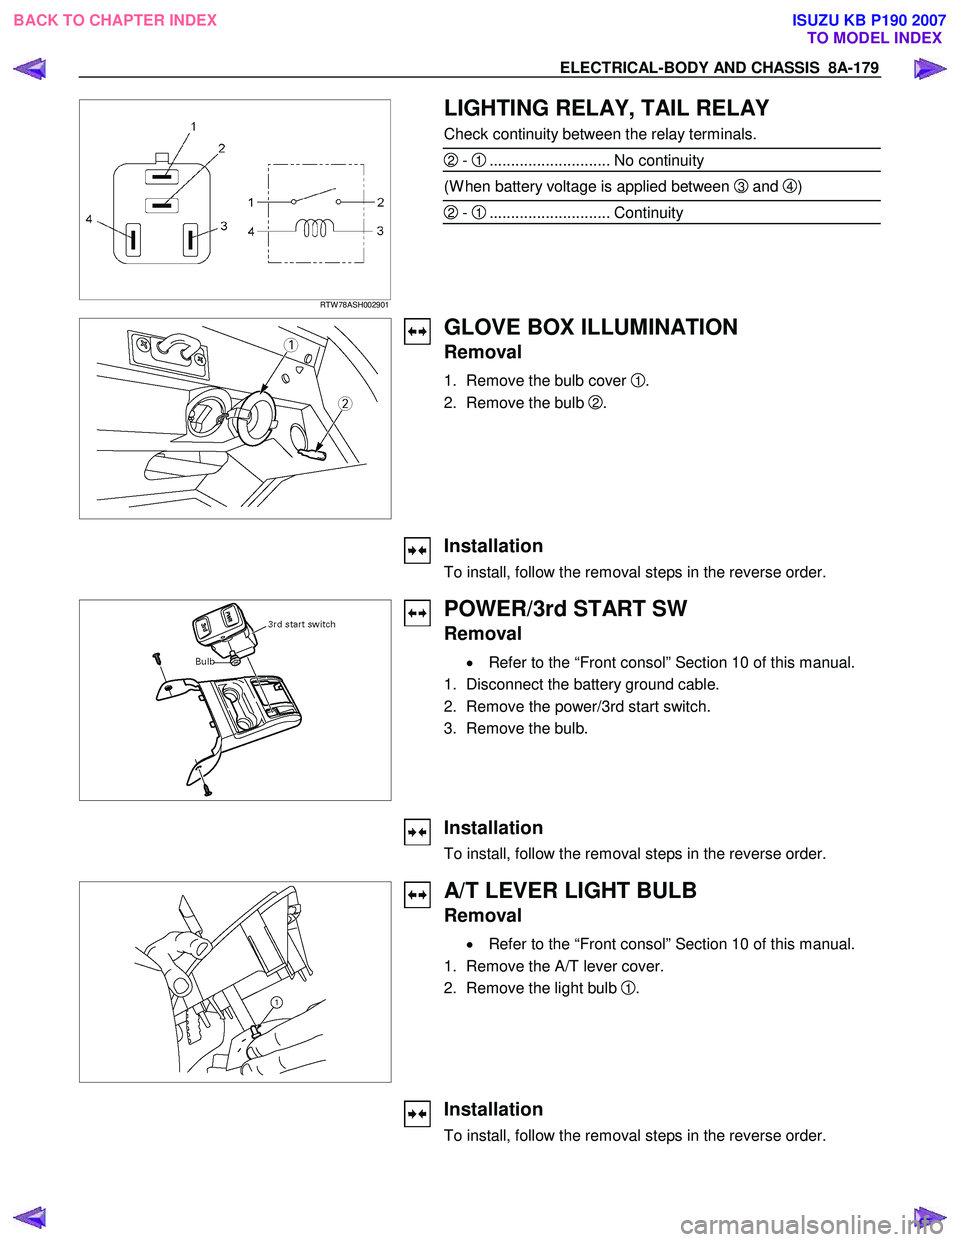 ISUZU KB P190 2007  Workshop Repair Manual ELECTRICAL-BODY AND CHASSIS  8A-179 
   
 
 
 
RTW 78ASH002901 
  
 LIGHTING RELAY, TAIL RELAY 
Check continuity between the relay terminals. 
2 - 1............................ No continuity 
(W hen b